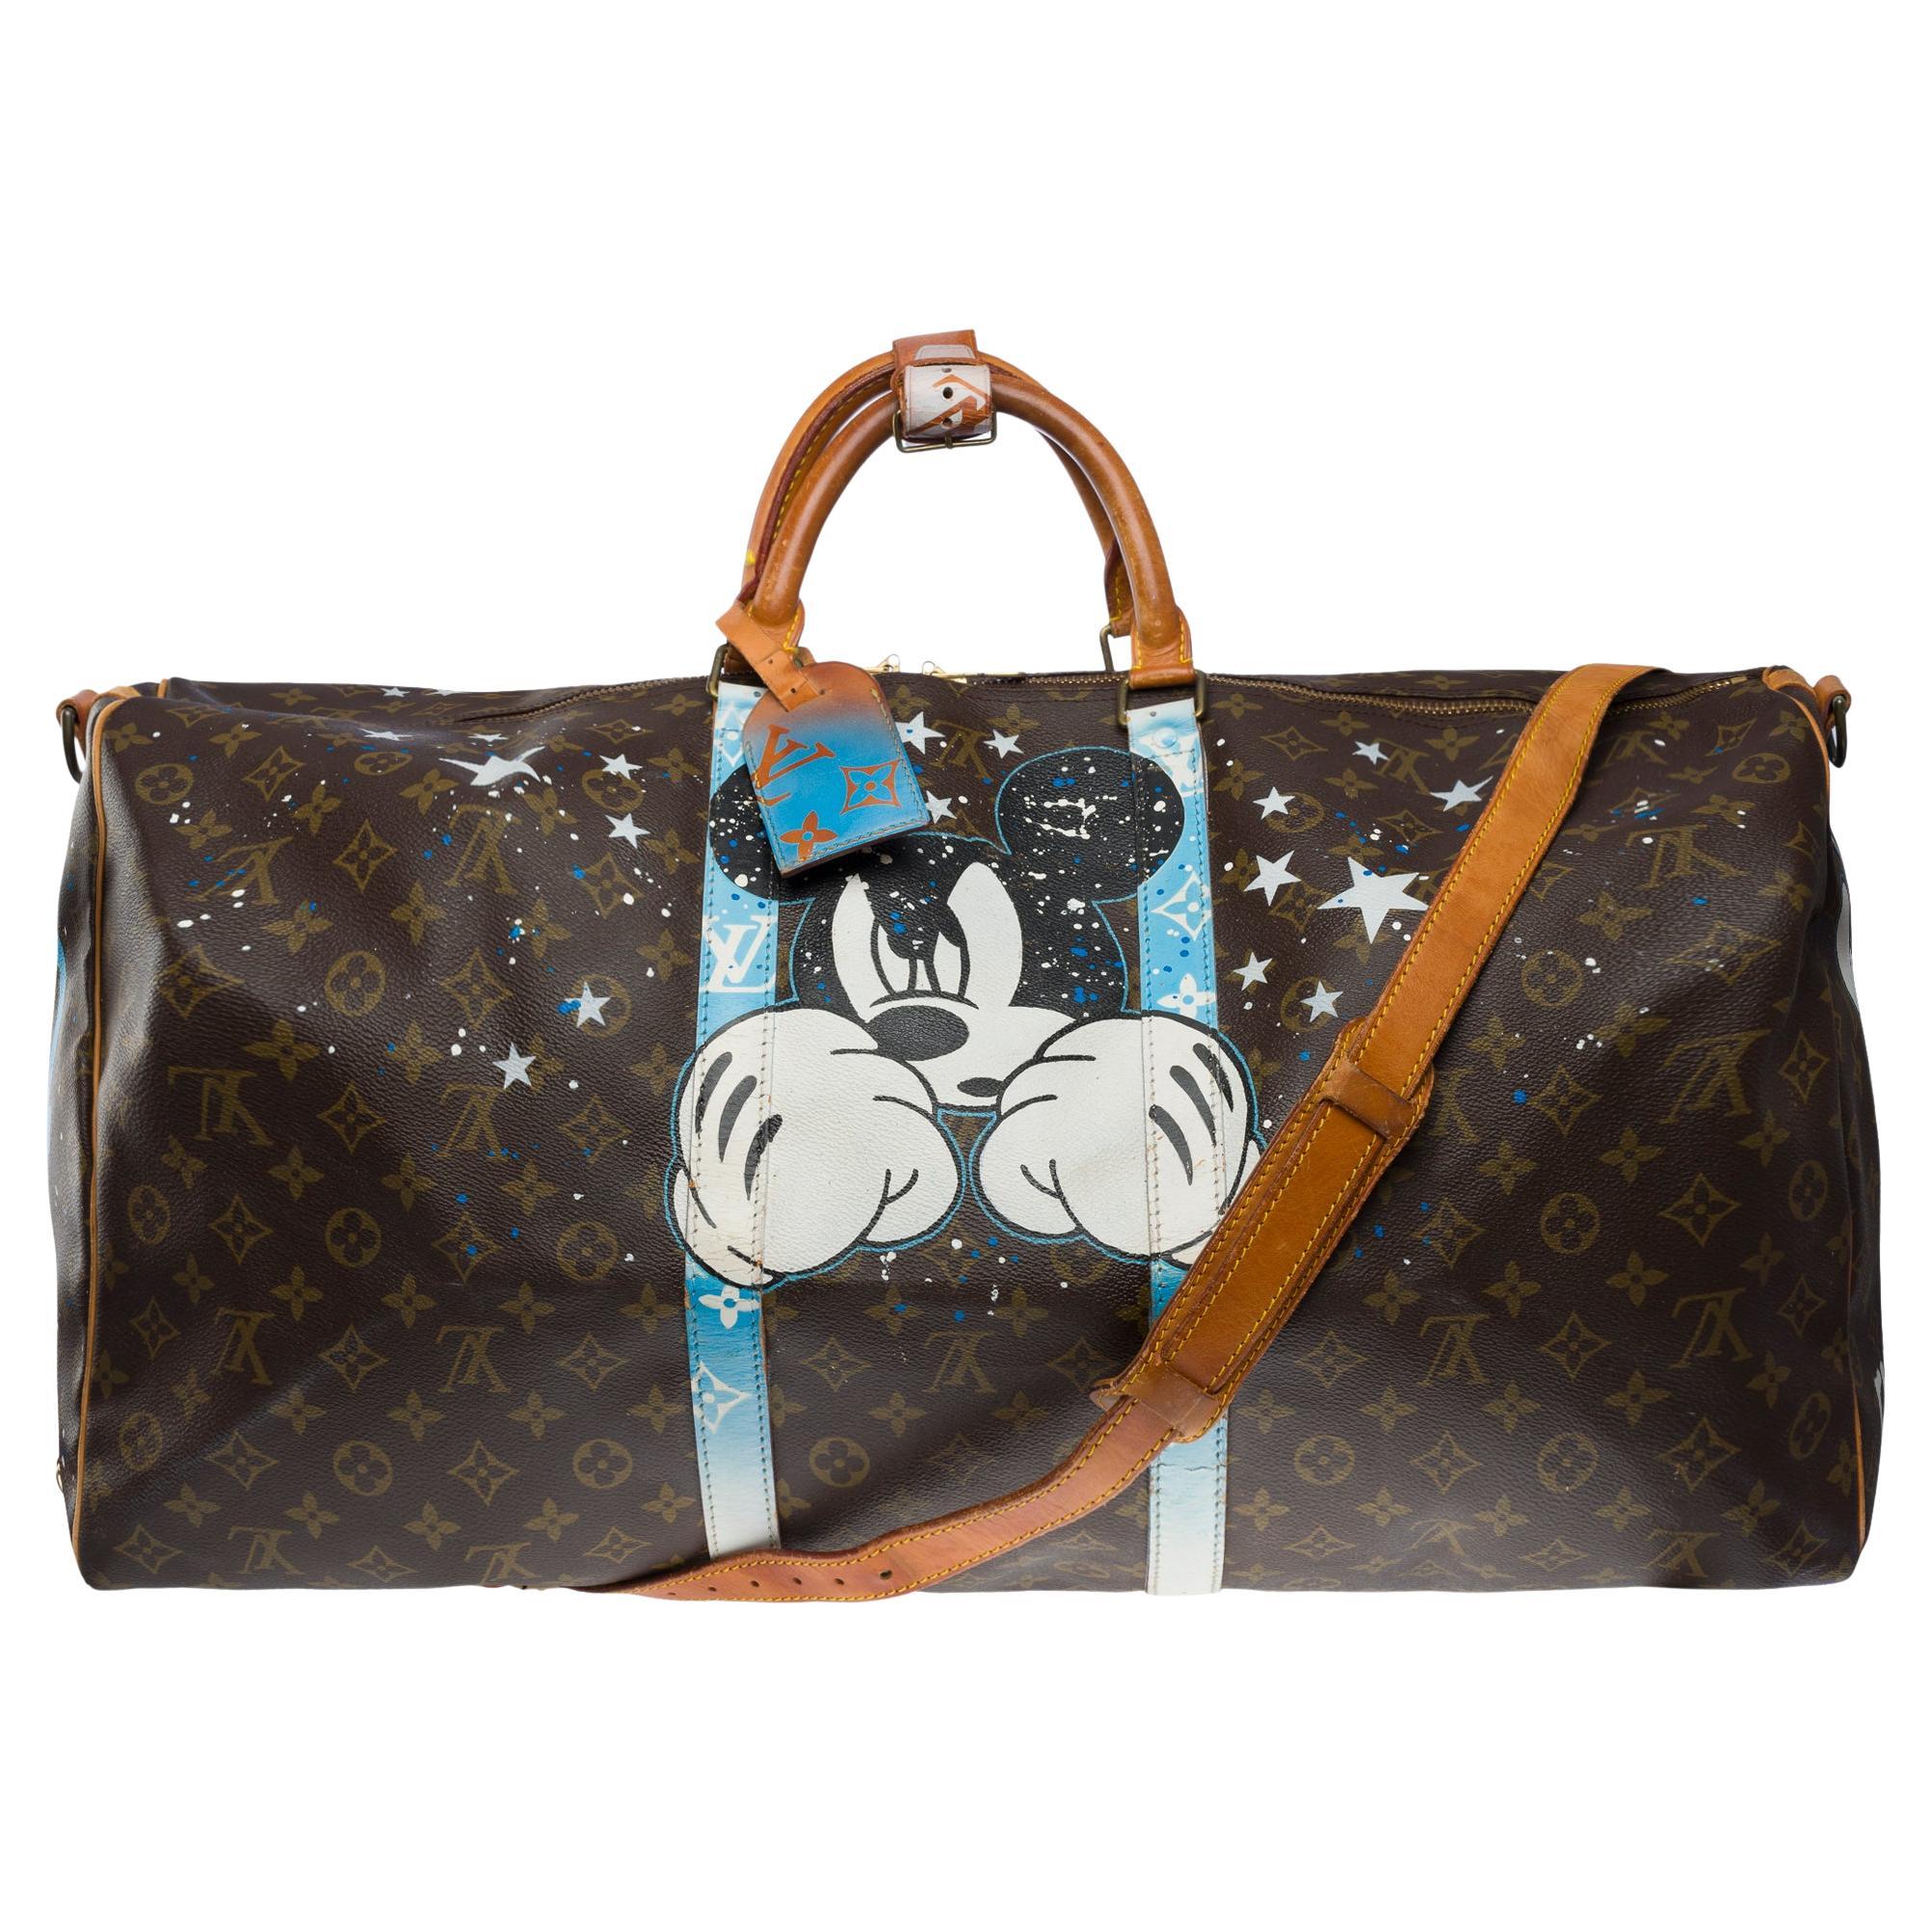 Customized "Fight Club" Louis Vuitton Keepall 60 Travel bag strap, GHW